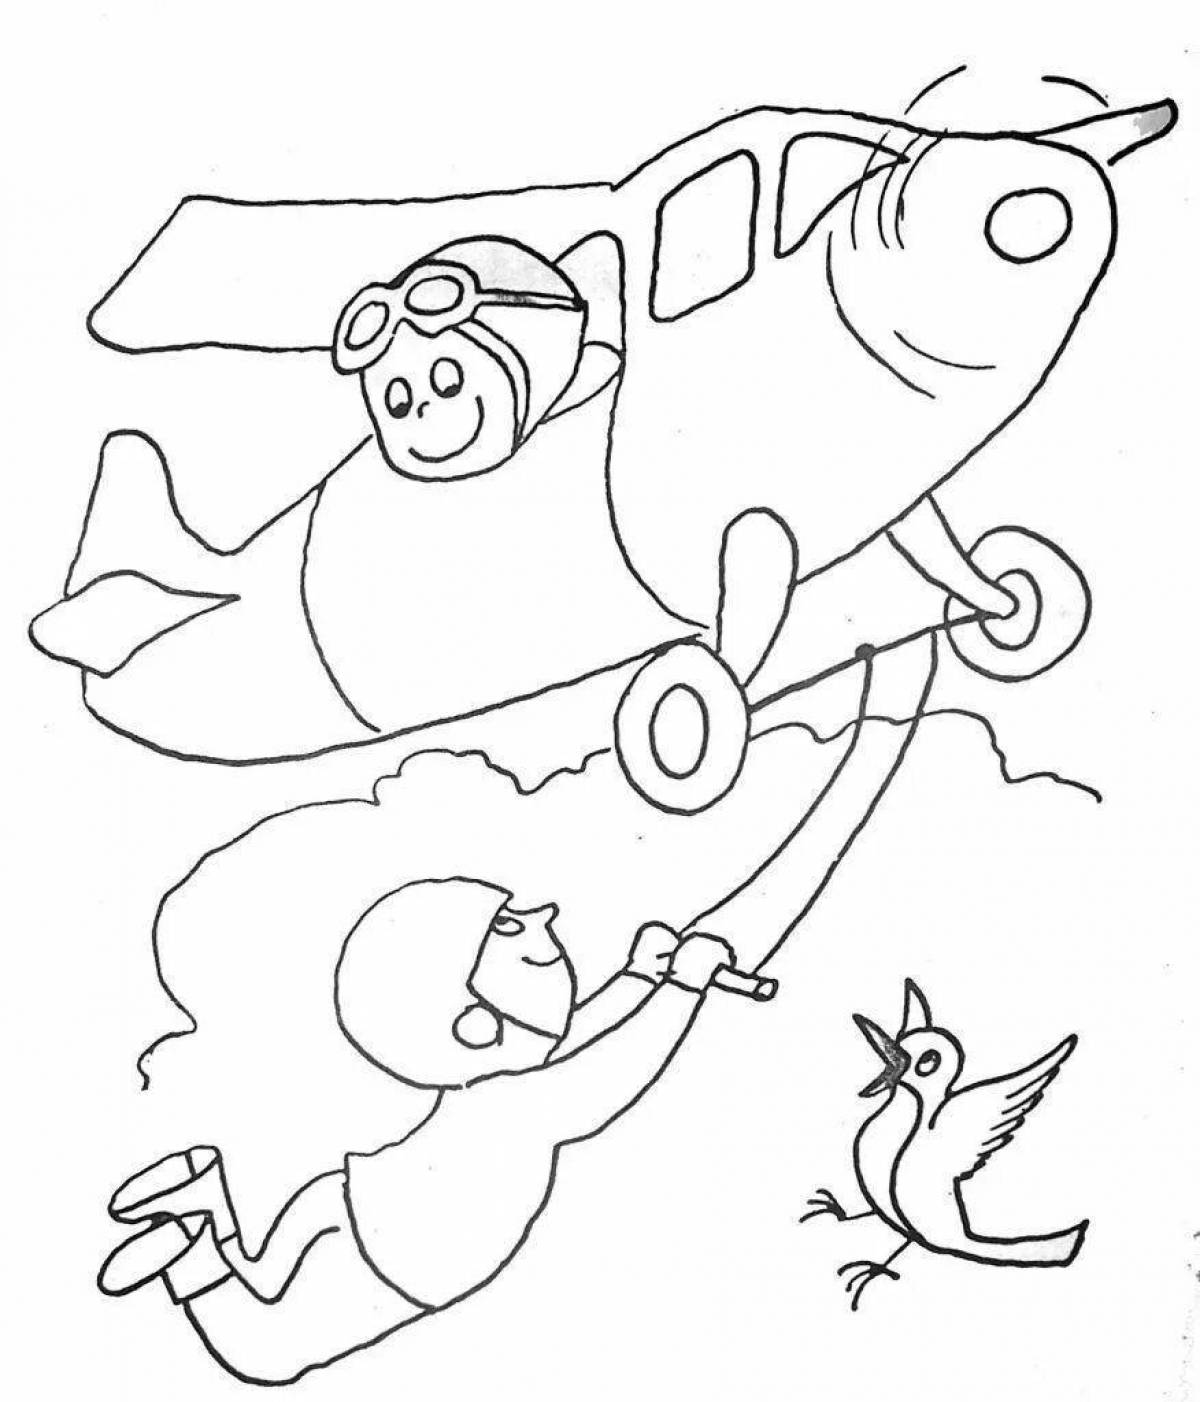 Entertaining coloring book transport profession for children 5-6 years old